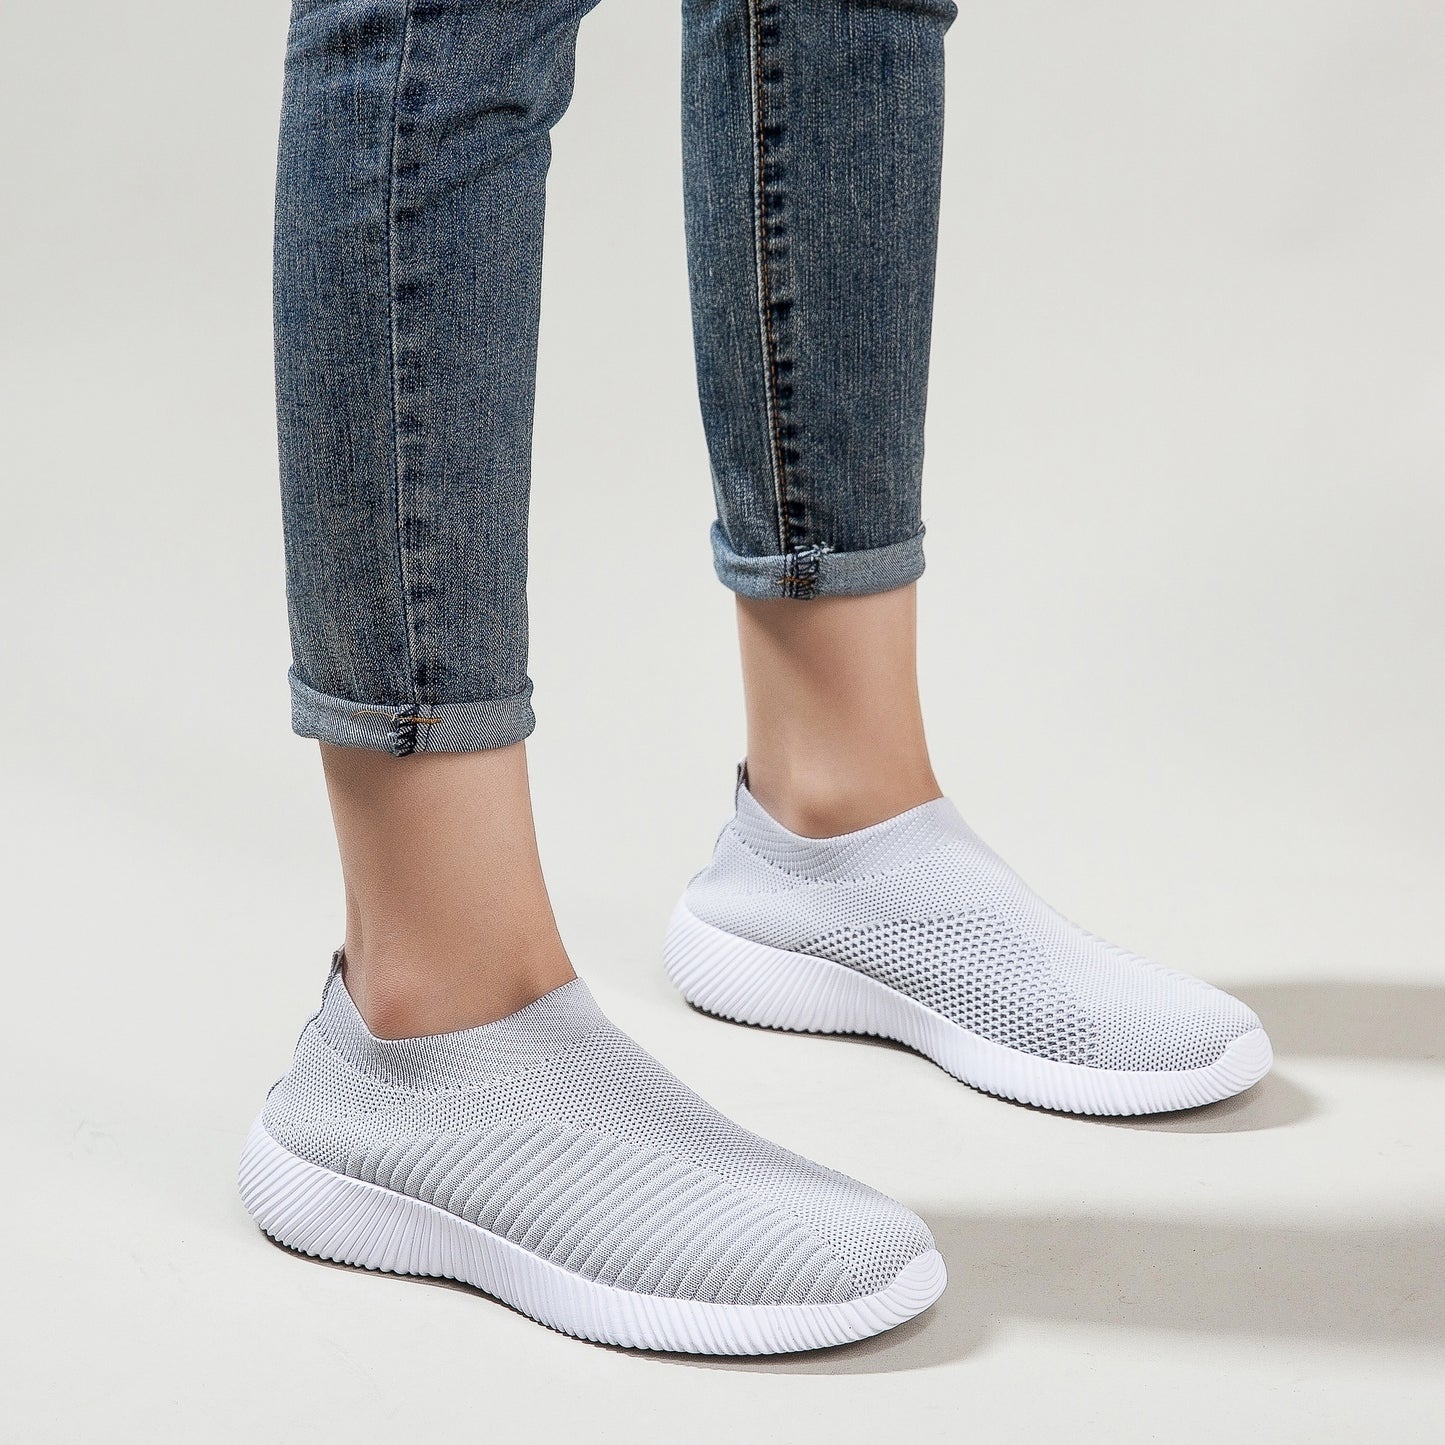 Women's Solid Color Casual Shoes, Lightweight Breathable Slip On Socks Shoes, Low Top Sneakers